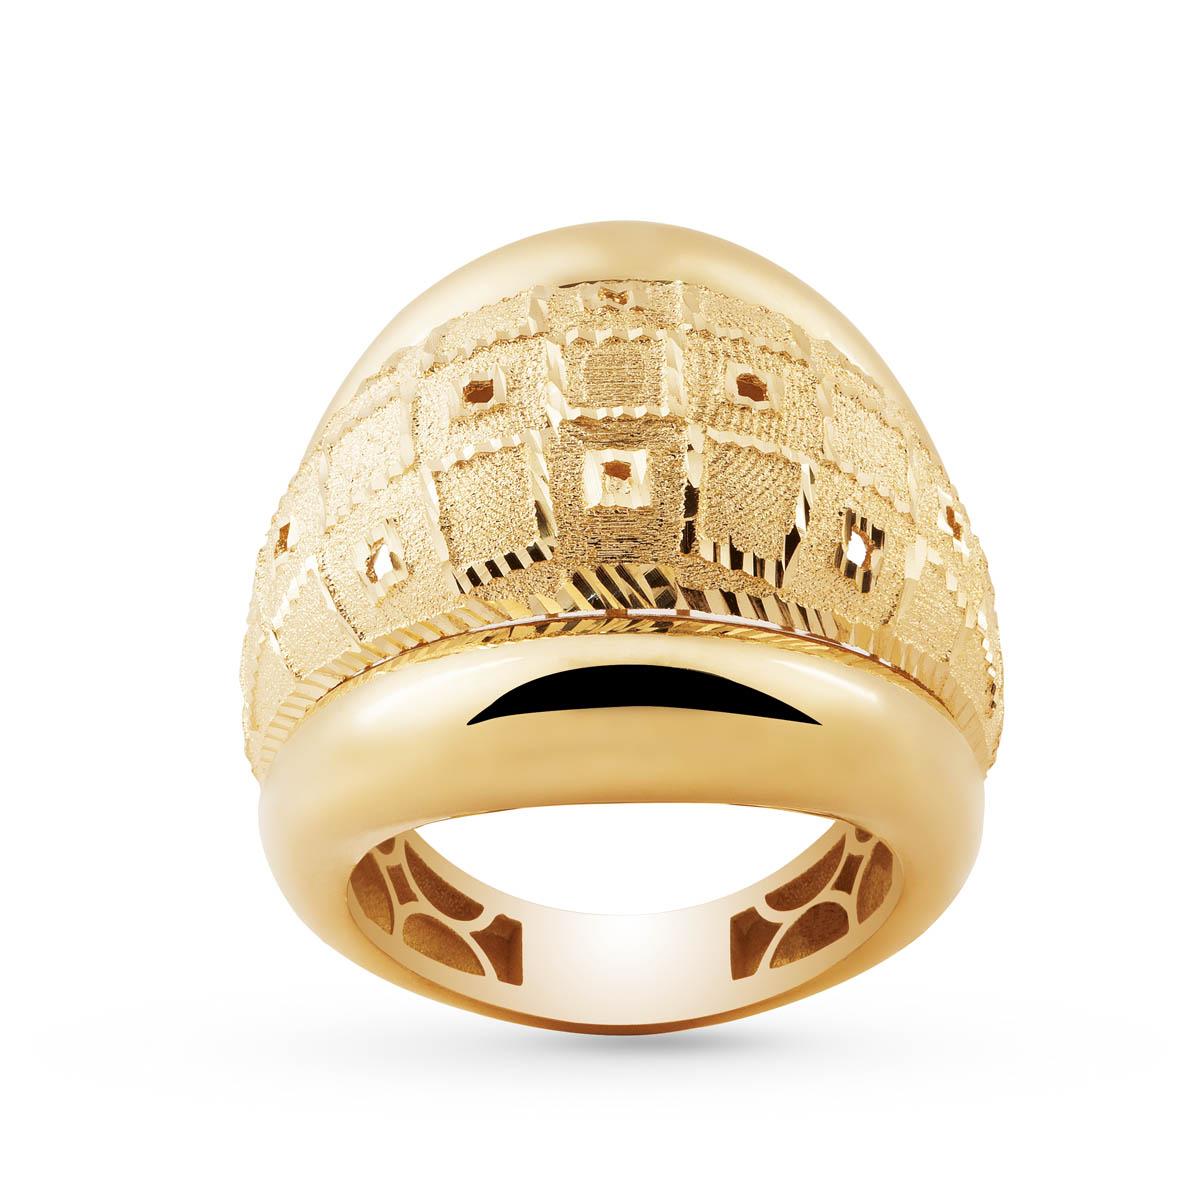 18kt polished and satin gold convex band ring - AP036